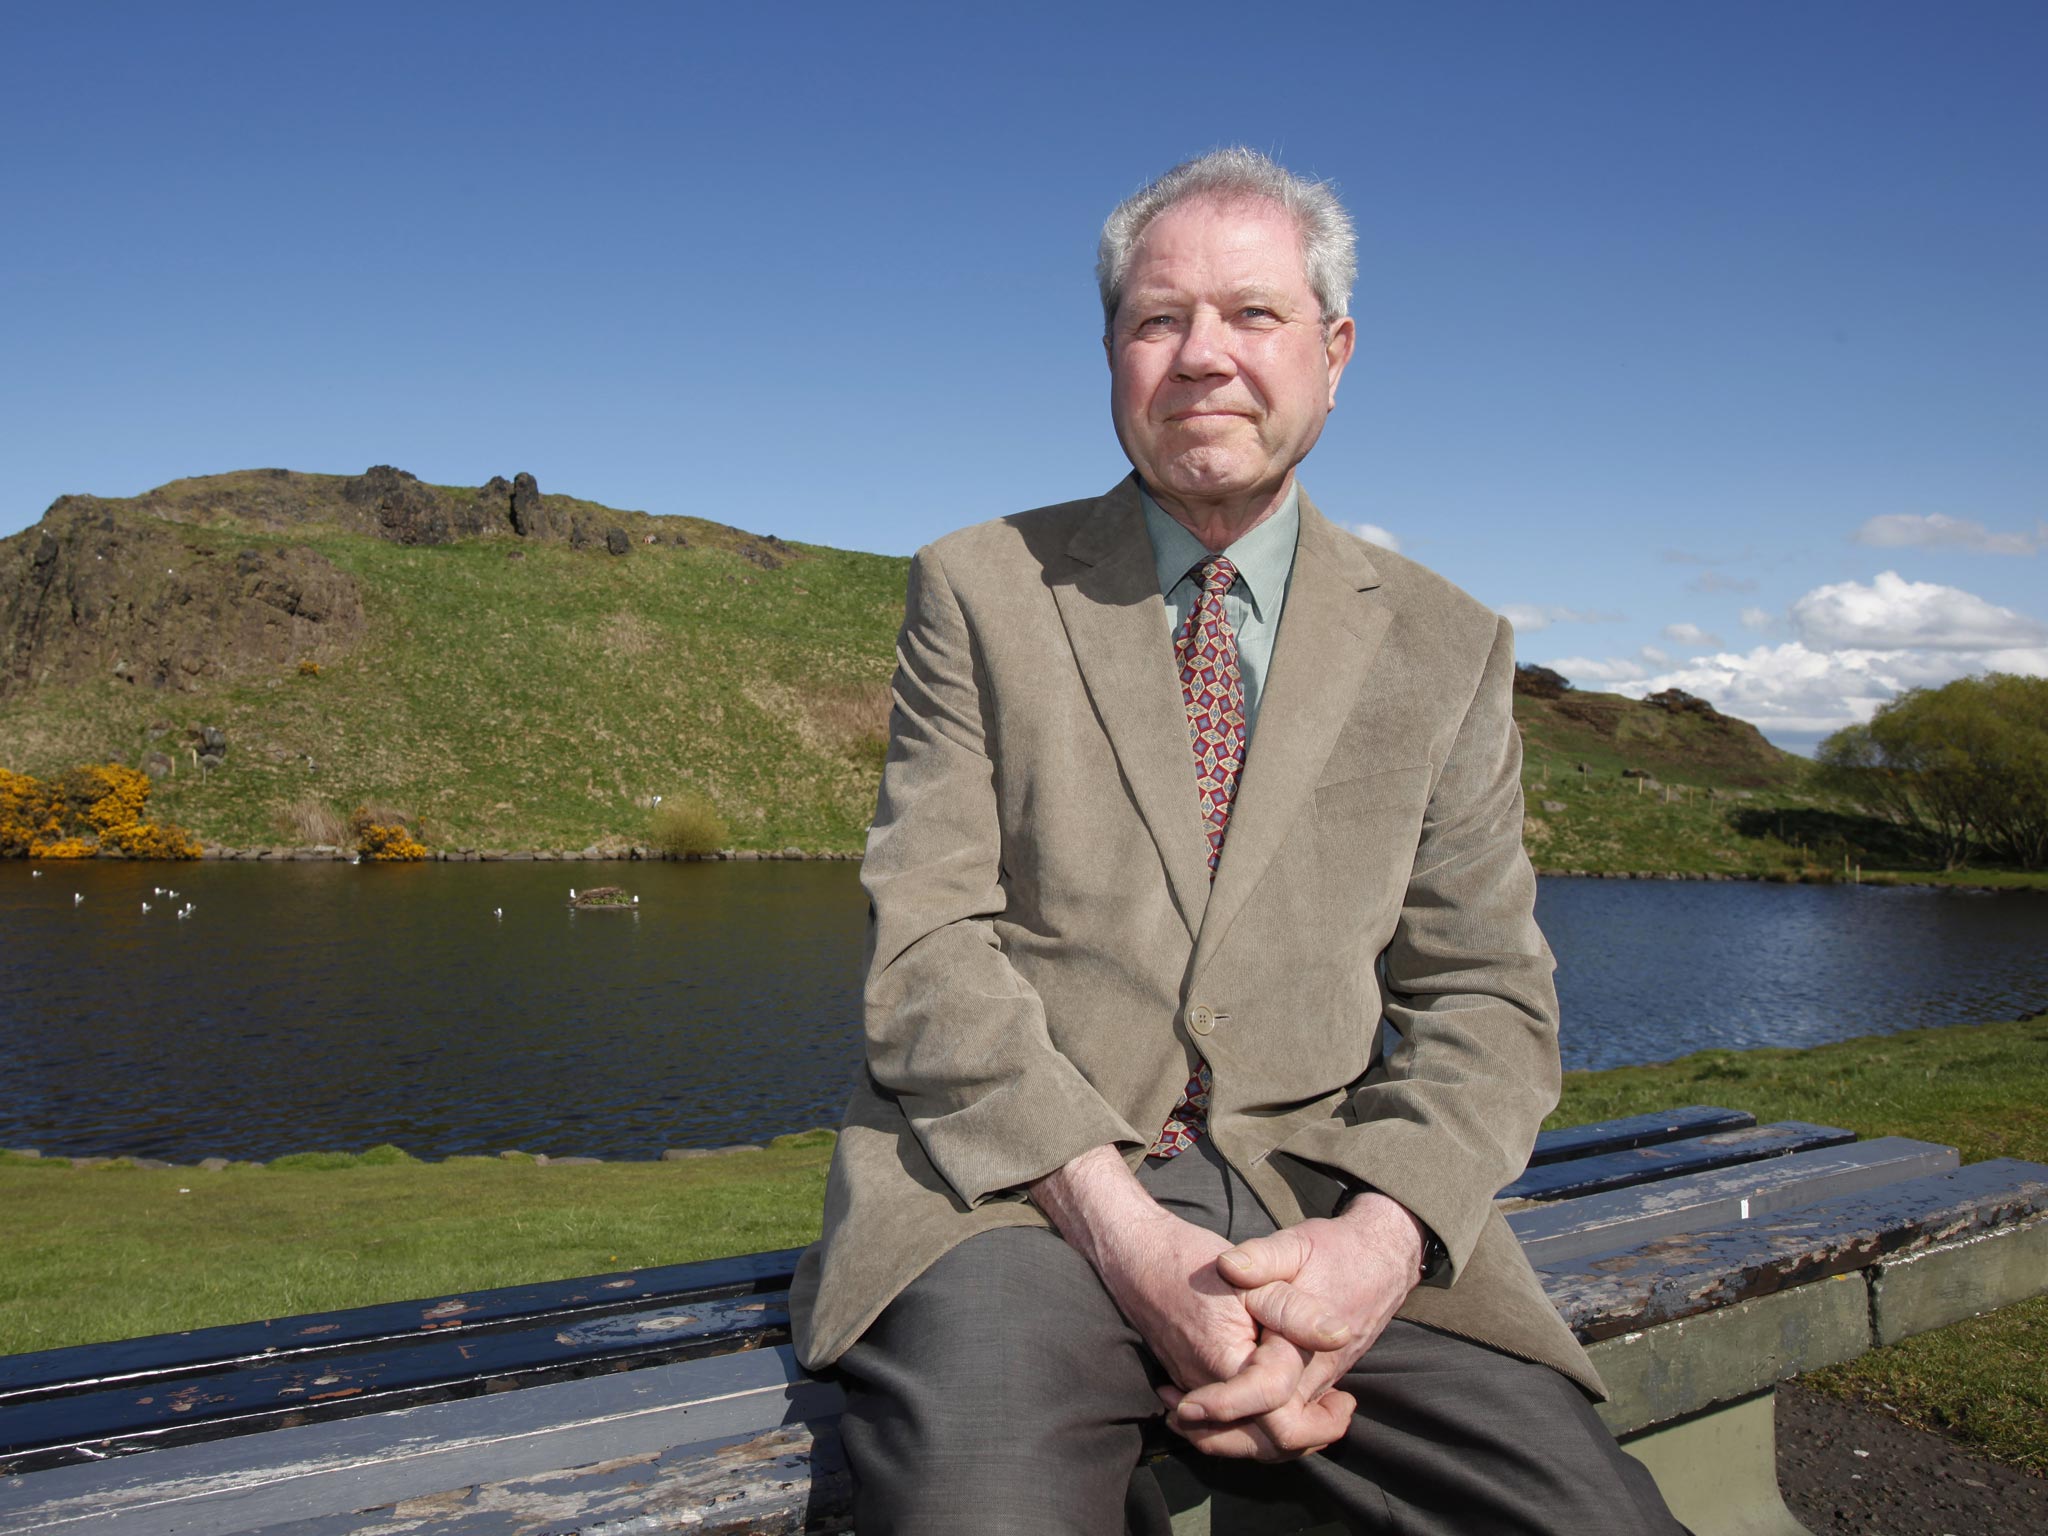 Jim Sillars, former deputy leader of the SNP, believes MI5 will be conducting a dirty tricks campaign against the Yes Scotland movement